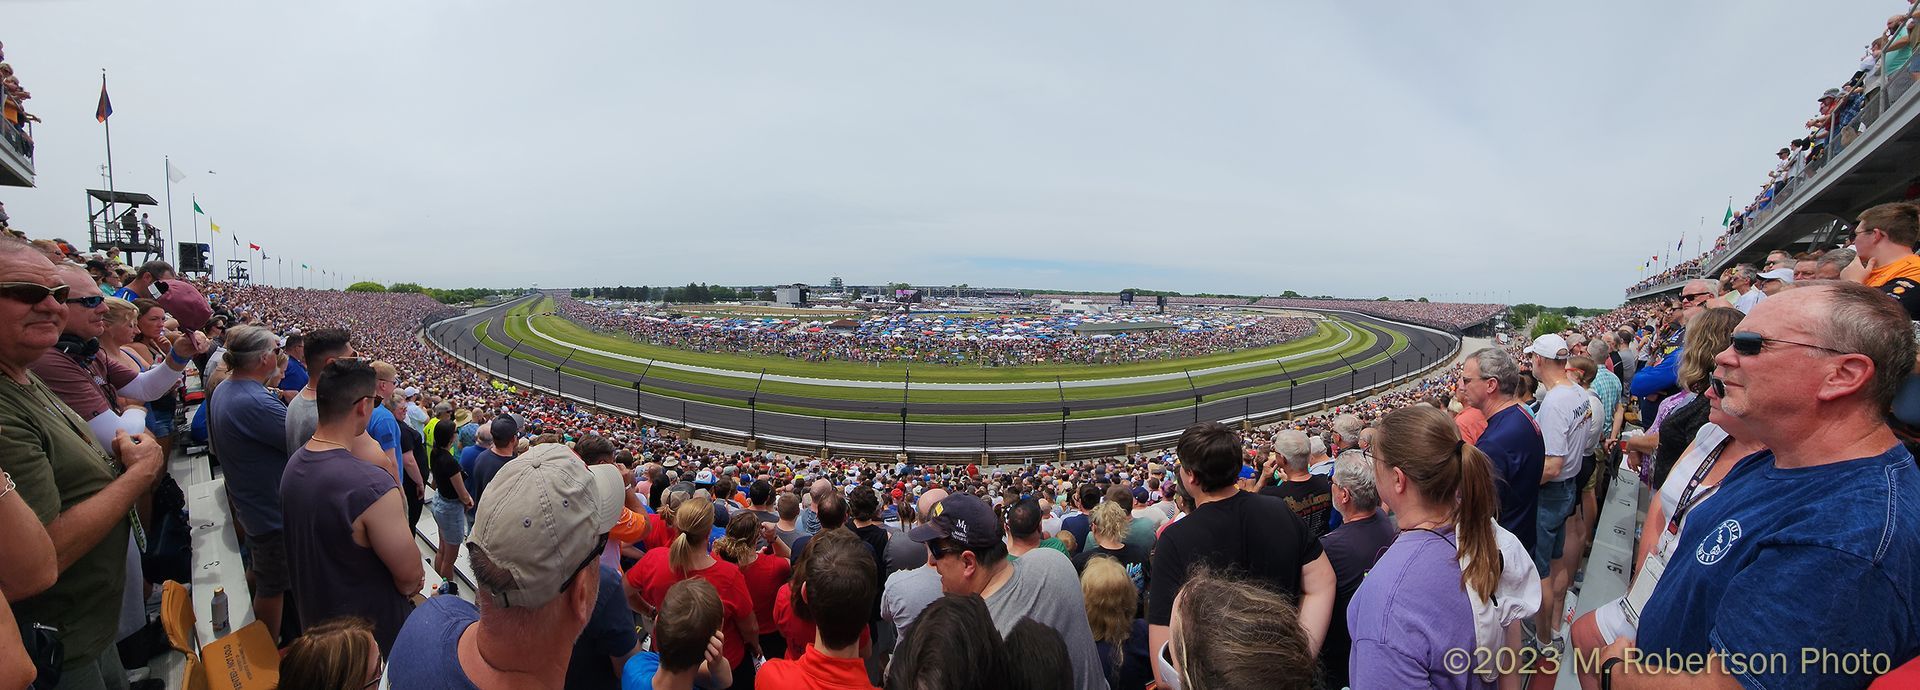 View from the stands 2023 Indianapolis 500